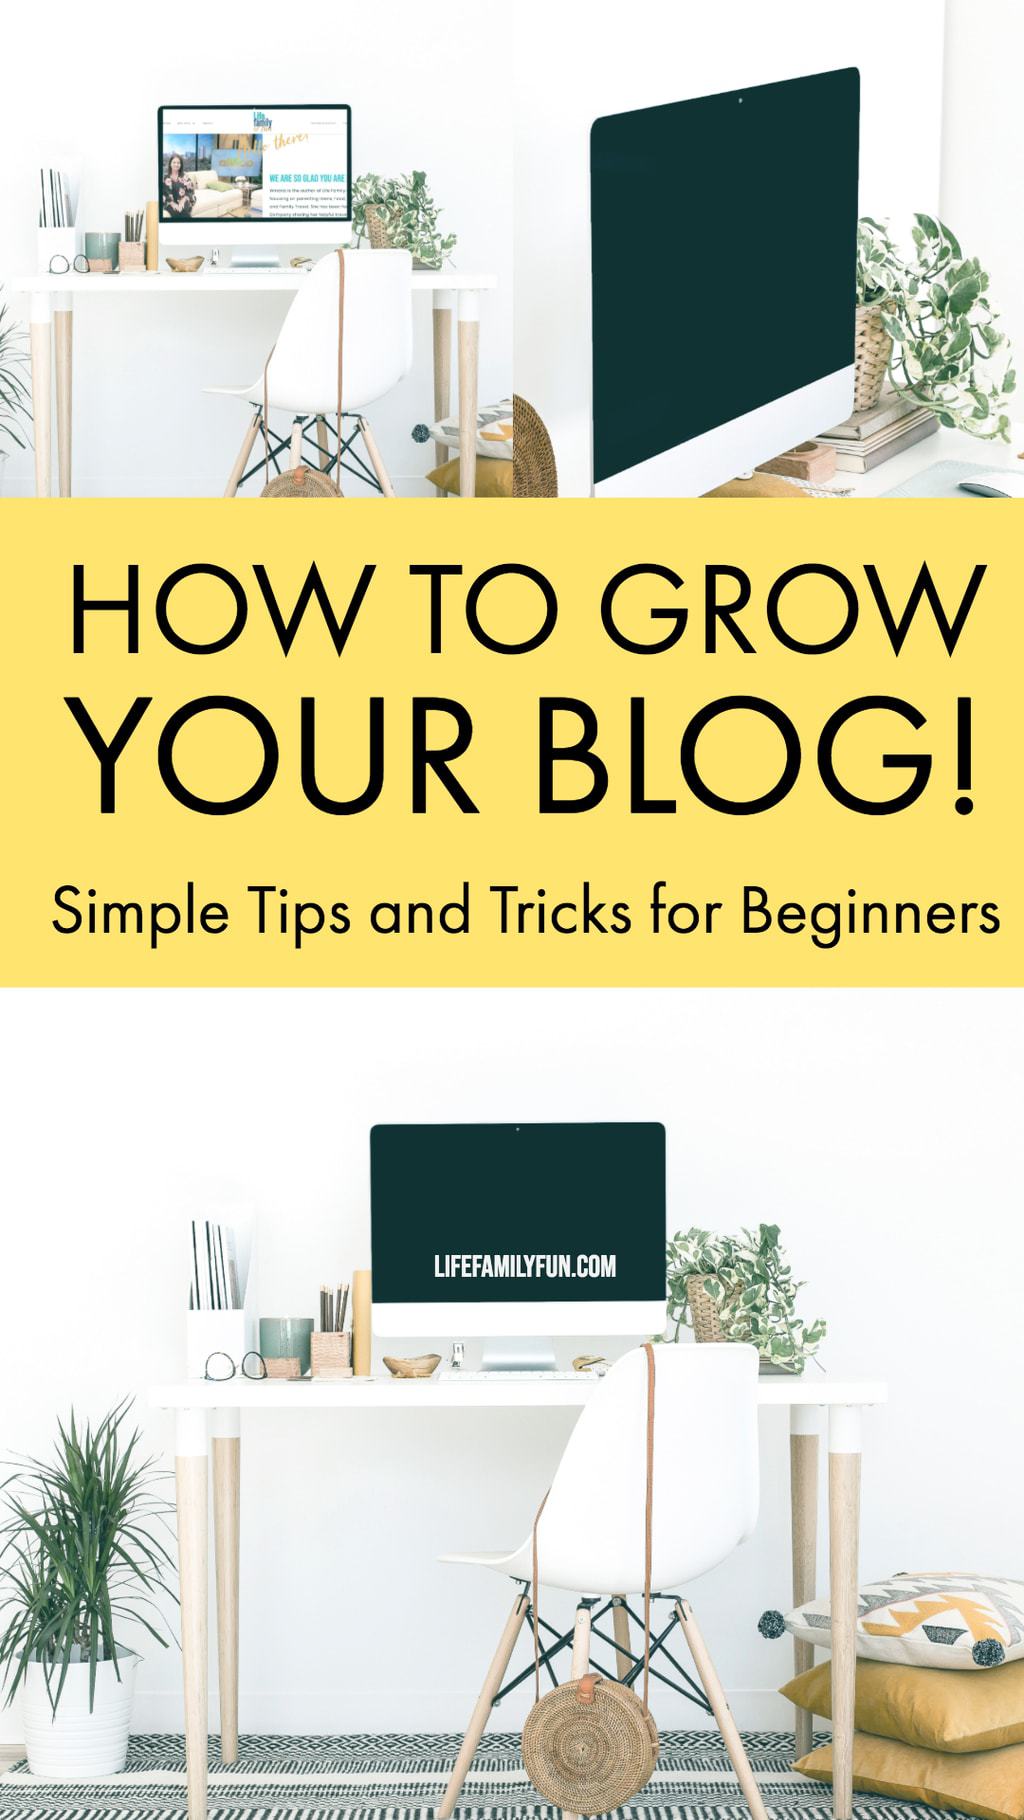 Looking for some super simple tips and tricks to help you grow your blog? These 5 simple tips and are one that any blogger can implement and use to grow.